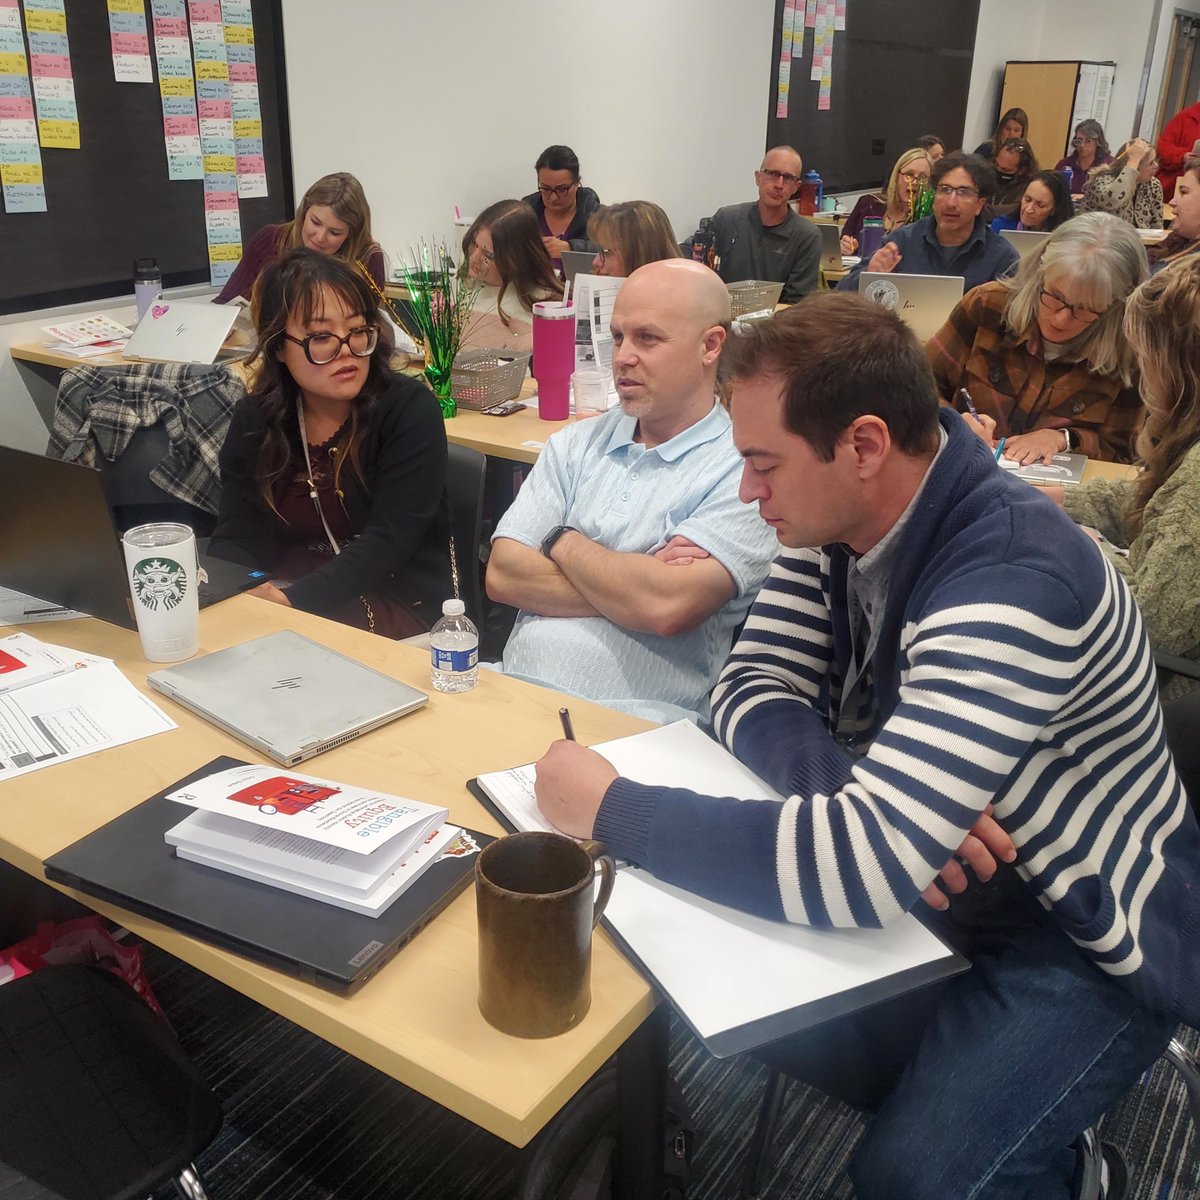 How can educators prioritize the need to think with an equity lens with the pressures of ensuring academic success? thinkLaw founder Colin Seale is in Washoe County, NV diving deep into educational equity. zurl.co/epDX